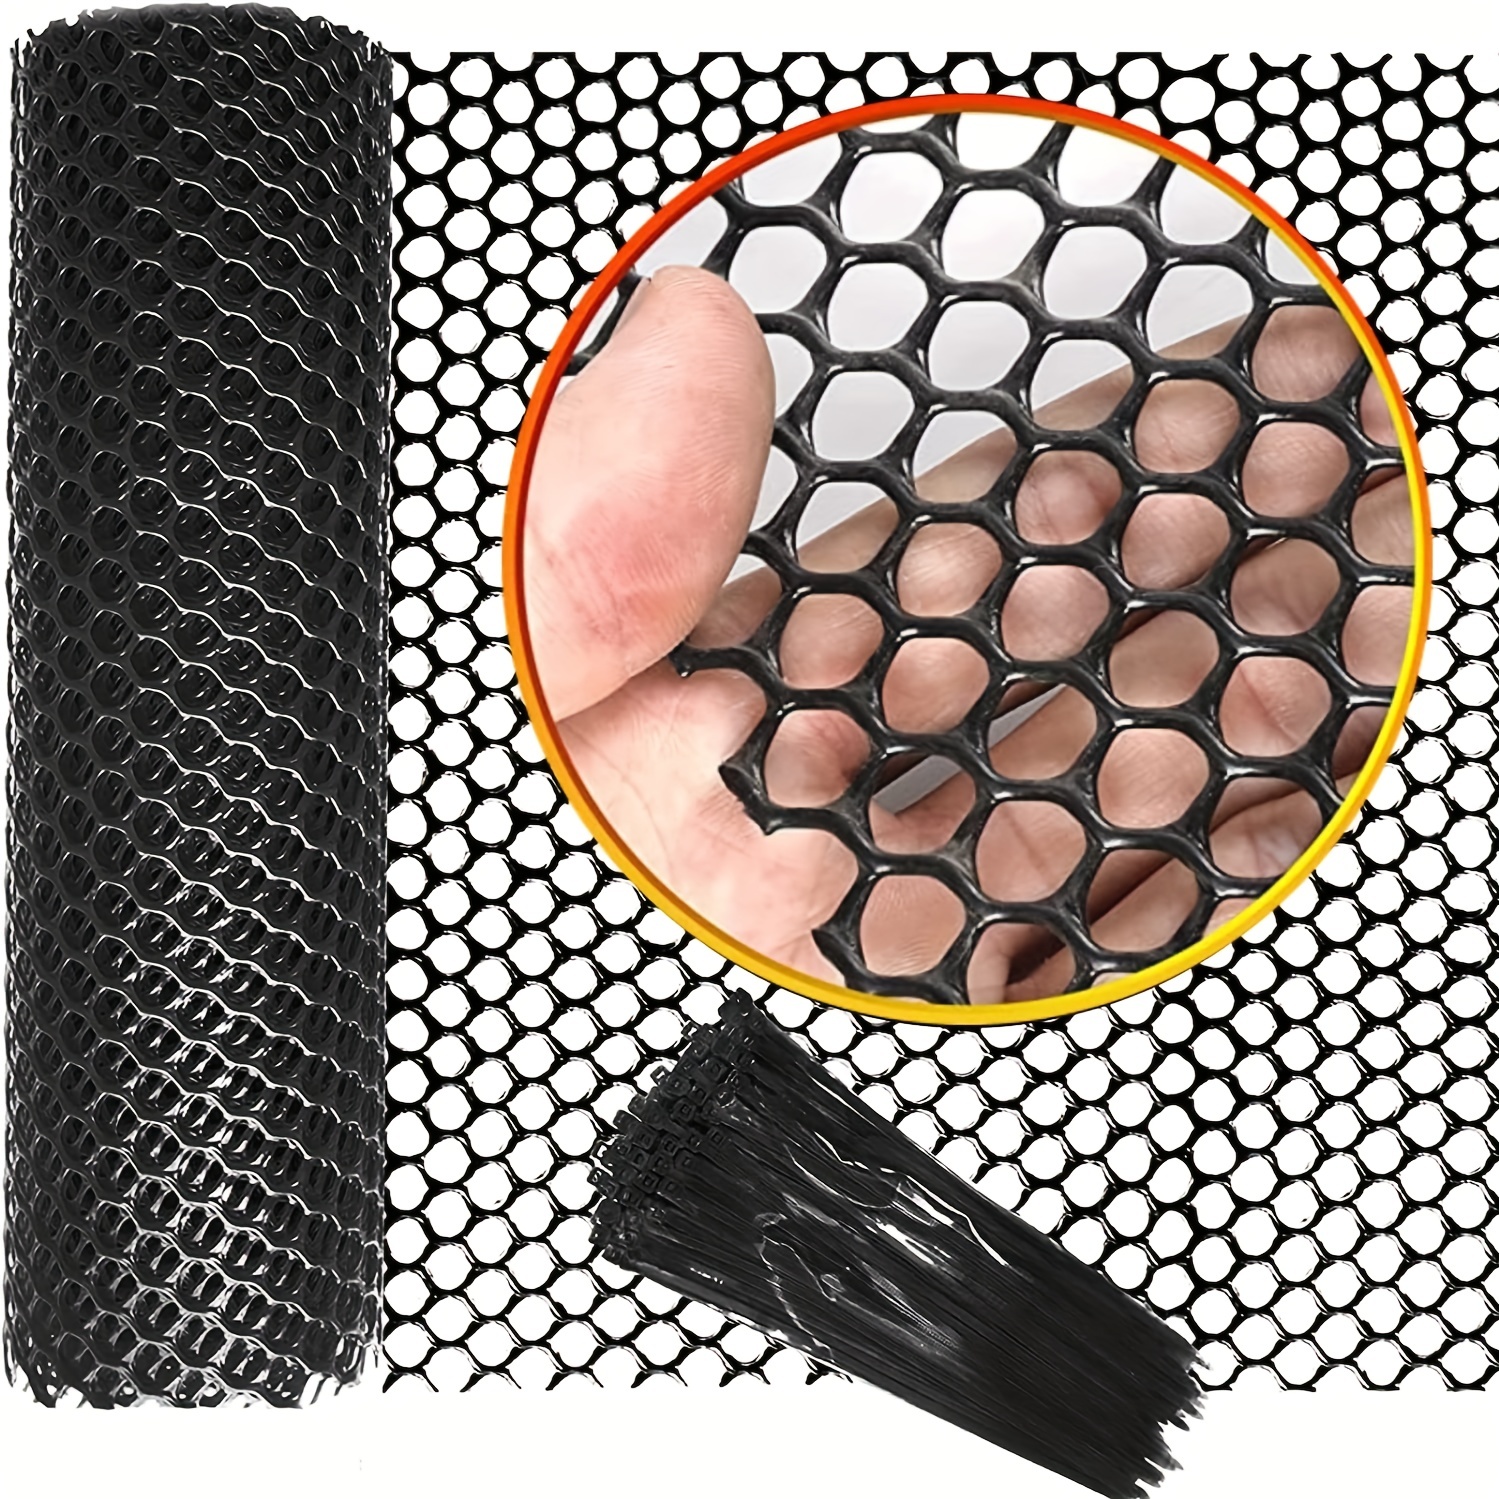 15.7 Inch X 10FT Plastic Chicken Fence Mesh,Hexagonal Fencing Wire for  Gardening, Poultry, Chicken Wire Frame Black - AliExpress